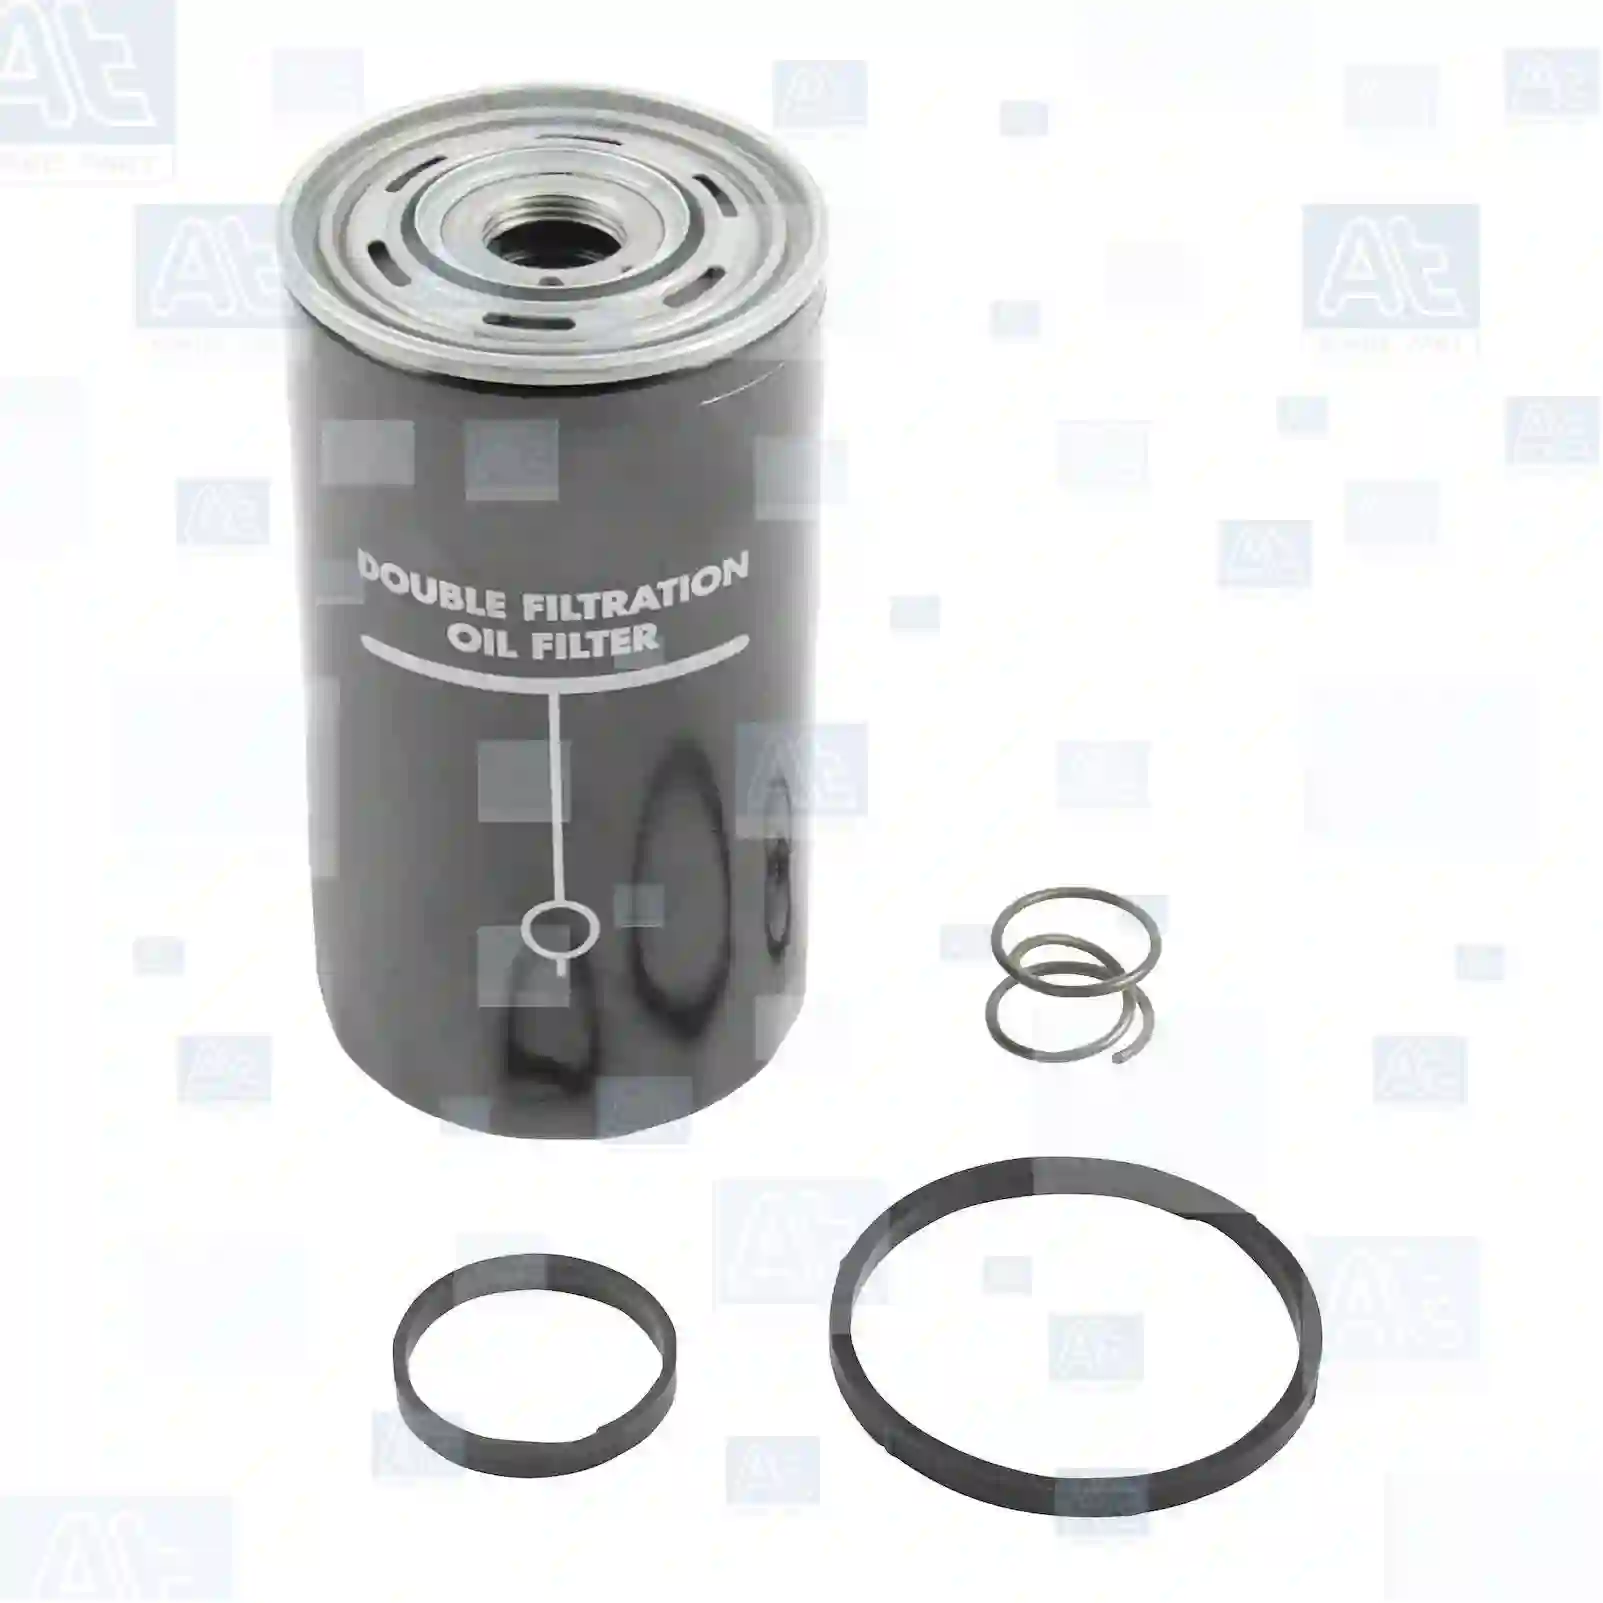 Oil filter, at no 77702365, oem no: 00952715, 1930906, 1931048, 1931048MP, 4787733, 500322702, 01831117, 01902102, 01903629, 01903715, 01907581, 01907584, 01930542, 01930906, 01931048, 04787733, 19309061, 61315398, 61315399, 74787733, 98432653, H220WN, 01902102, 01903629, 01903715, 01907581, 01907584, 01907884, 01930542, 01930906, 01933629, 02997305, 04787733, 1902102, 1903629, 1903715, 1907584, 2997305, 4787733, 500039719, 500040978, 61315398, 61315399, 98432653, 01930906, 01931048, 1931048MP, 500322702, 5001846646, 6005019783, ZG01714-0008 At Spare Part | Engine, Accelerator Pedal, Camshaft, Connecting Rod, Crankcase, Crankshaft, Cylinder Head, Engine Suspension Mountings, Exhaust Manifold, Exhaust Gas Recirculation, Filter Kits, Flywheel Housing, General Overhaul Kits, Engine, Intake Manifold, Oil Cleaner, Oil Cooler, Oil Filter, Oil Pump, Oil Sump, Piston & Liner, Sensor & Switch, Timing Case, Turbocharger, Cooling System, Belt Tensioner, Coolant Filter, Coolant Pipe, Corrosion Prevention Agent, Drive, Expansion Tank, Fan, Intercooler, Monitors & Gauges, Radiator, Thermostat, V-Belt / Timing belt, Water Pump, Fuel System, Electronical Injector Unit, Feed Pump, Fuel Filter, cpl., Fuel Gauge Sender,  Fuel Line, Fuel Pump, Fuel Tank, Injection Line Kit, Injection Pump, Exhaust System, Clutch & Pedal, Gearbox, Propeller Shaft, Axles, Brake System, Hubs & Wheels, Suspension, Leaf Spring, Universal Parts / Accessories, Steering, Electrical System, Cabin Oil filter, at no 77702365, oem no: 00952715, 1930906, 1931048, 1931048MP, 4787733, 500322702, 01831117, 01902102, 01903629, 01903715, 01907581, 01907584, 01930542, 01930906, 01931048, 04787733, 19309061, 61315398, 61315399, 74787733, 98432653, H220WN, 01902102, 01903629, 01903715, 01907581, 01907584, 01907884, 01930542, 01930906, 01933629, 02997305, 04787733, 1902102, 1903629, 1903715, 1907584, 2997305, 4787733, 500039719, 500040978, 61315398, 61315399, 98432653, 01930906, 01931048, 1931048MP, 500322702, 5001846646, 6005019783, ZG01714-0008 At Spare Part | Engine, Accelerator Pedal, Camshaft, Connecting Rod, Crankcase, Crankshaft, Cylinder Head, Engine Suspension Mountings, Exhaust Manifold, Exhaust Gas Recirculation, Filter Kits, Flywheel Housing, General Overhaul Kits, Engine, Intake Manifold, Oil Cleaner, Oil Cooler, Oil Filter, Oil Pump, Oil Sump, Piston & Liner, Sensor & Switch, Timing Case, Turbocharger, Cooling System, Belt Tensioner, Coolant Filter, Coolant Pipe, Corrosion Prevention Agent, Drive, Expansion Tank, Fan, Intercooler, Monitors & Gauges, Radiator, Thermostat, V-Belt / Timing belt, Water Pump, Fuel System, Electronical Injector Unit, Feed Pump, Fuel Filter, cpl., Fuel Gauge Sender,  Fuel Line, Fuel Pump, Fuel Tank, Injection Line Kit, Injection Pump, Exhaust System, Clutch & Pedal, Gearbox, Propeller Shaft, Axles, Brake System, Hubs & Wheels, Suspension, Leaf Spring, Universal Parts / Accessories, Steering, Electrical System, Cabin